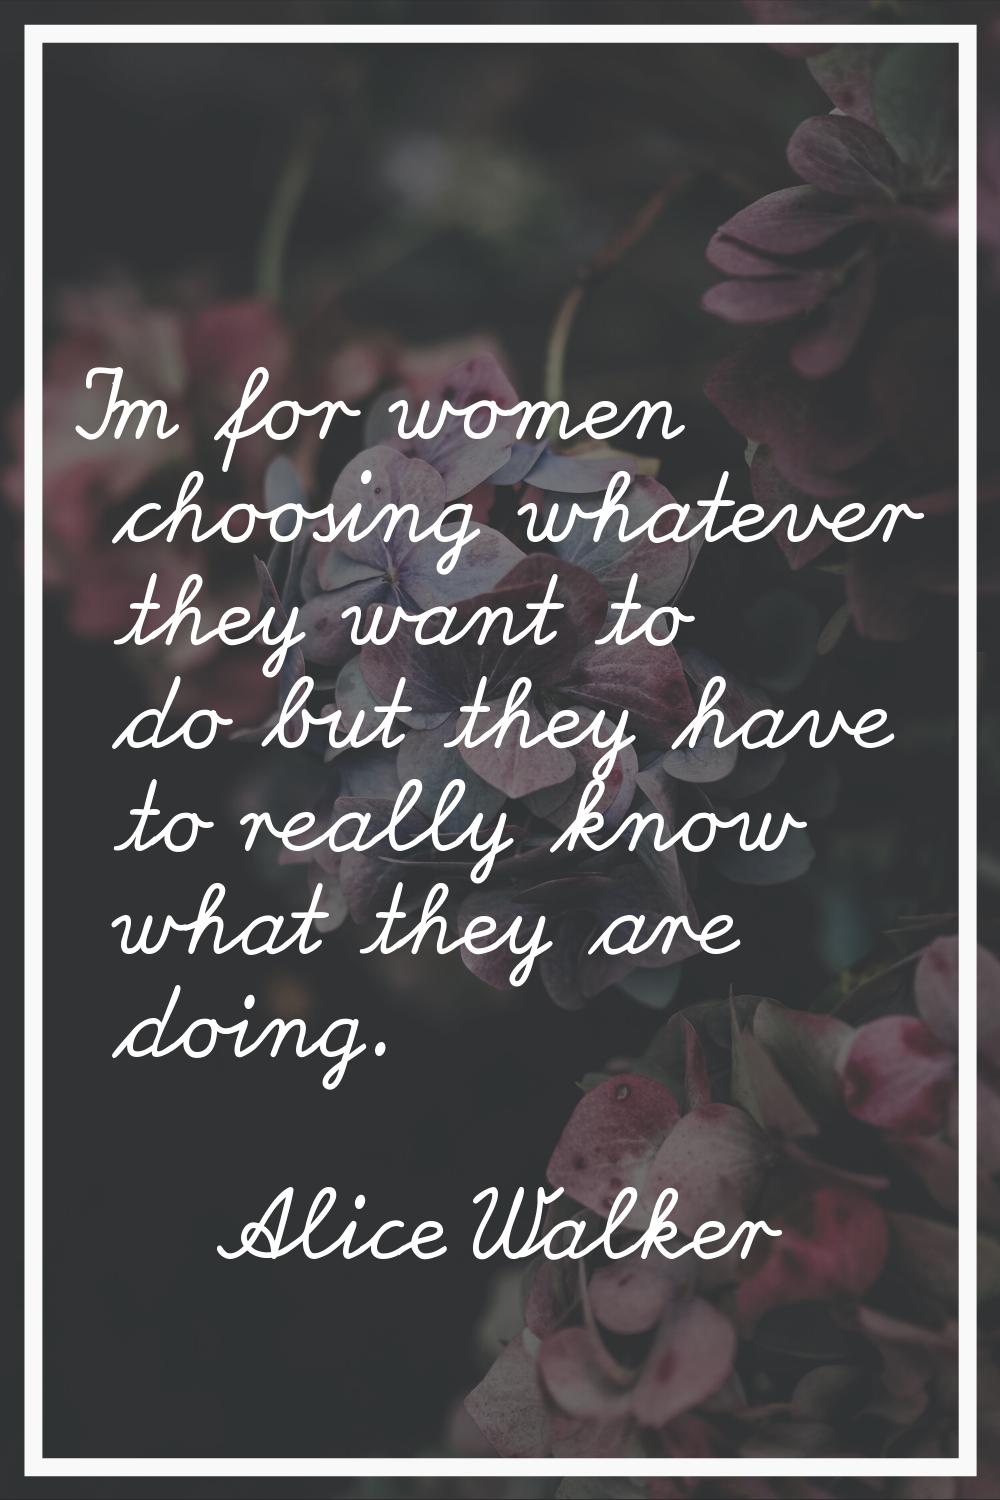 I'm for women choosing whatever they want to do but they have to really know what they are doing.